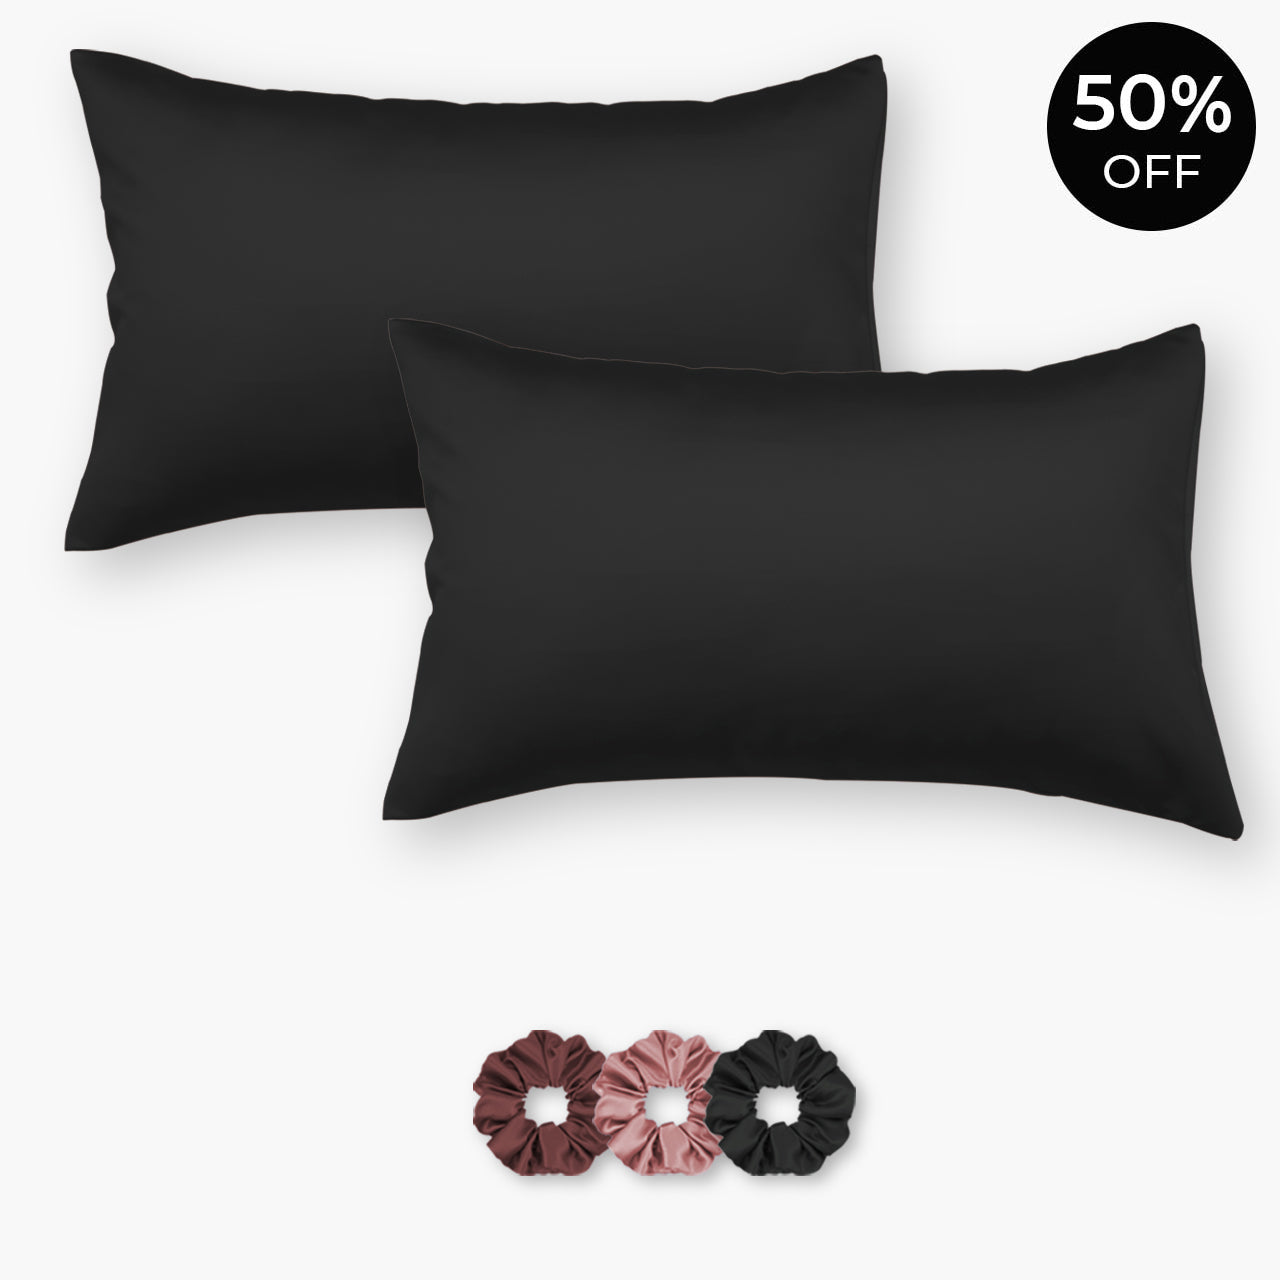 Load image into Gallery viewer, Satin Pillowcases - Pack of 2 (With 3 free scrunchies)
